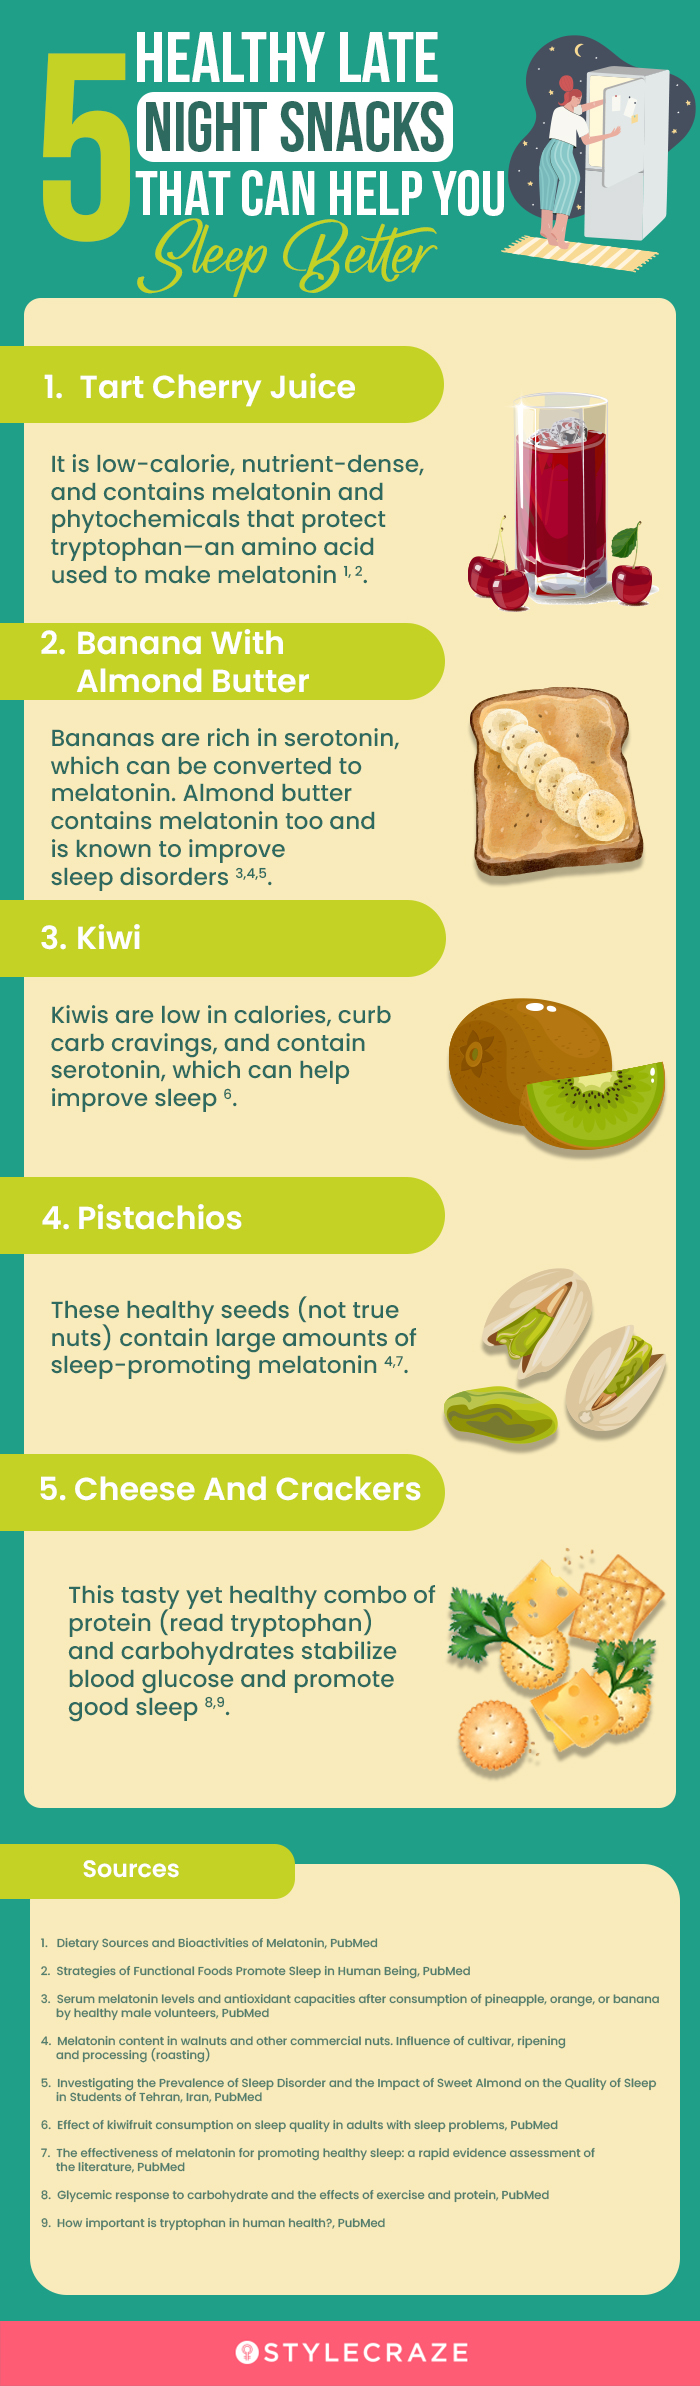 5 healthy late night snacks that can help you sleep better [infographic]